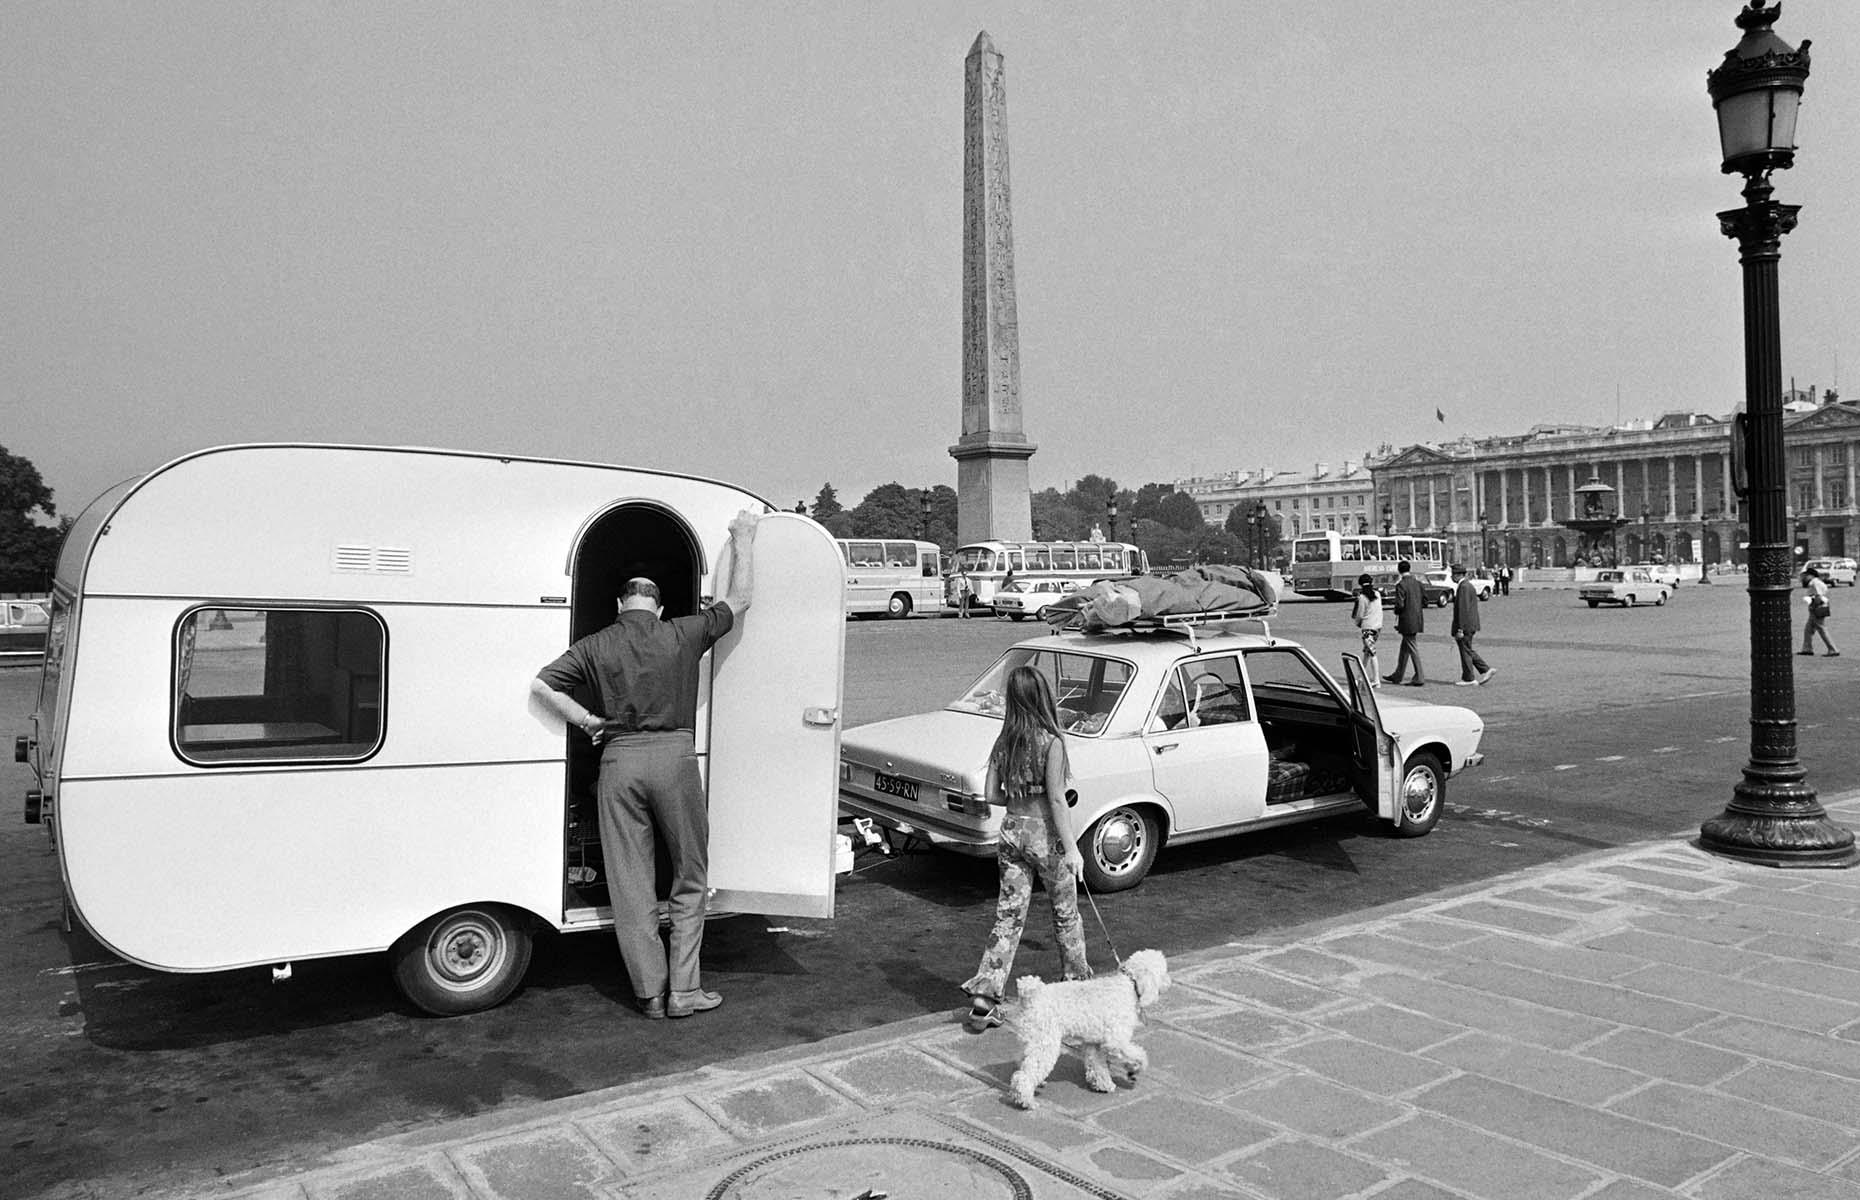 <p>In the post-war era, tourism to the French capital continued to increase. At the same time, road trips across Europe surged in popularity, with many embarking on longer trips during the summer vactions. Here, a Dutch tourist has parked his car and trailer in the heart of the Place de la Concorde in 1972. </p>  <p><strong><a href="https://www.loveexploring.com/guides/79619/explore-paris-places-to-see-what-to-do-and-where-to-stay">Discover what to see in Paris today</a></strong></p>